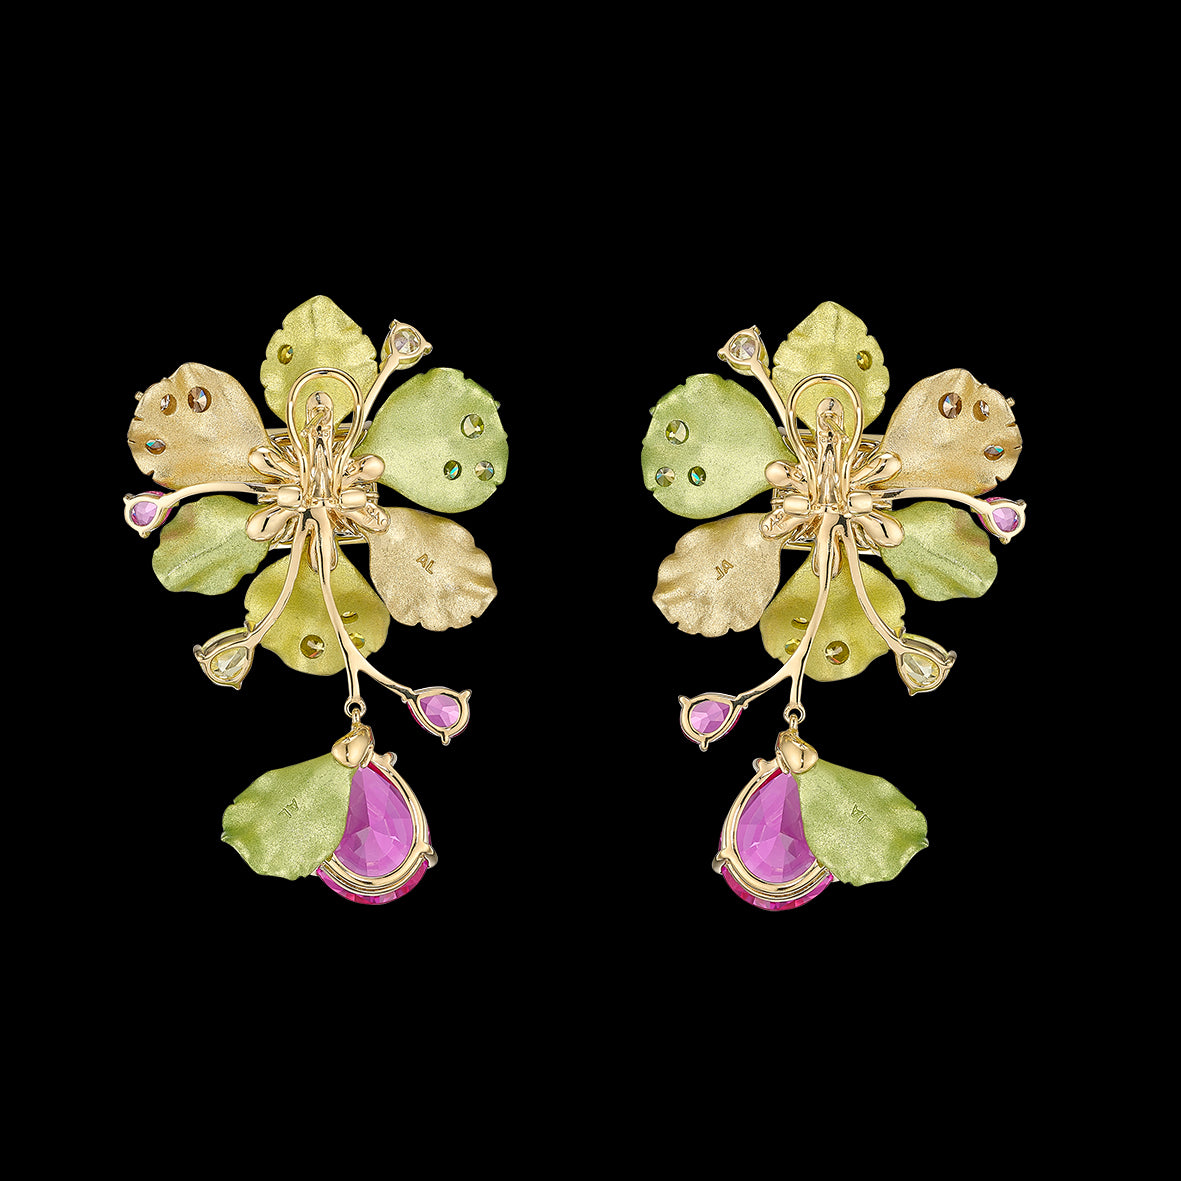 Lemon Fuchsia Neptuna Earrings, Earrings, Anabela Chan Joaillerie - Fine jewelry with laboratory grown and created gemstones hand-crafted in the United Kingdom. Anabela Chan Joaillerie is the first fine jewellery brand in the world to champion laboratory-grown and created gemstones with high jewellery design, artisanal craftsmanship and a focus on ethical and sustainable innovations.